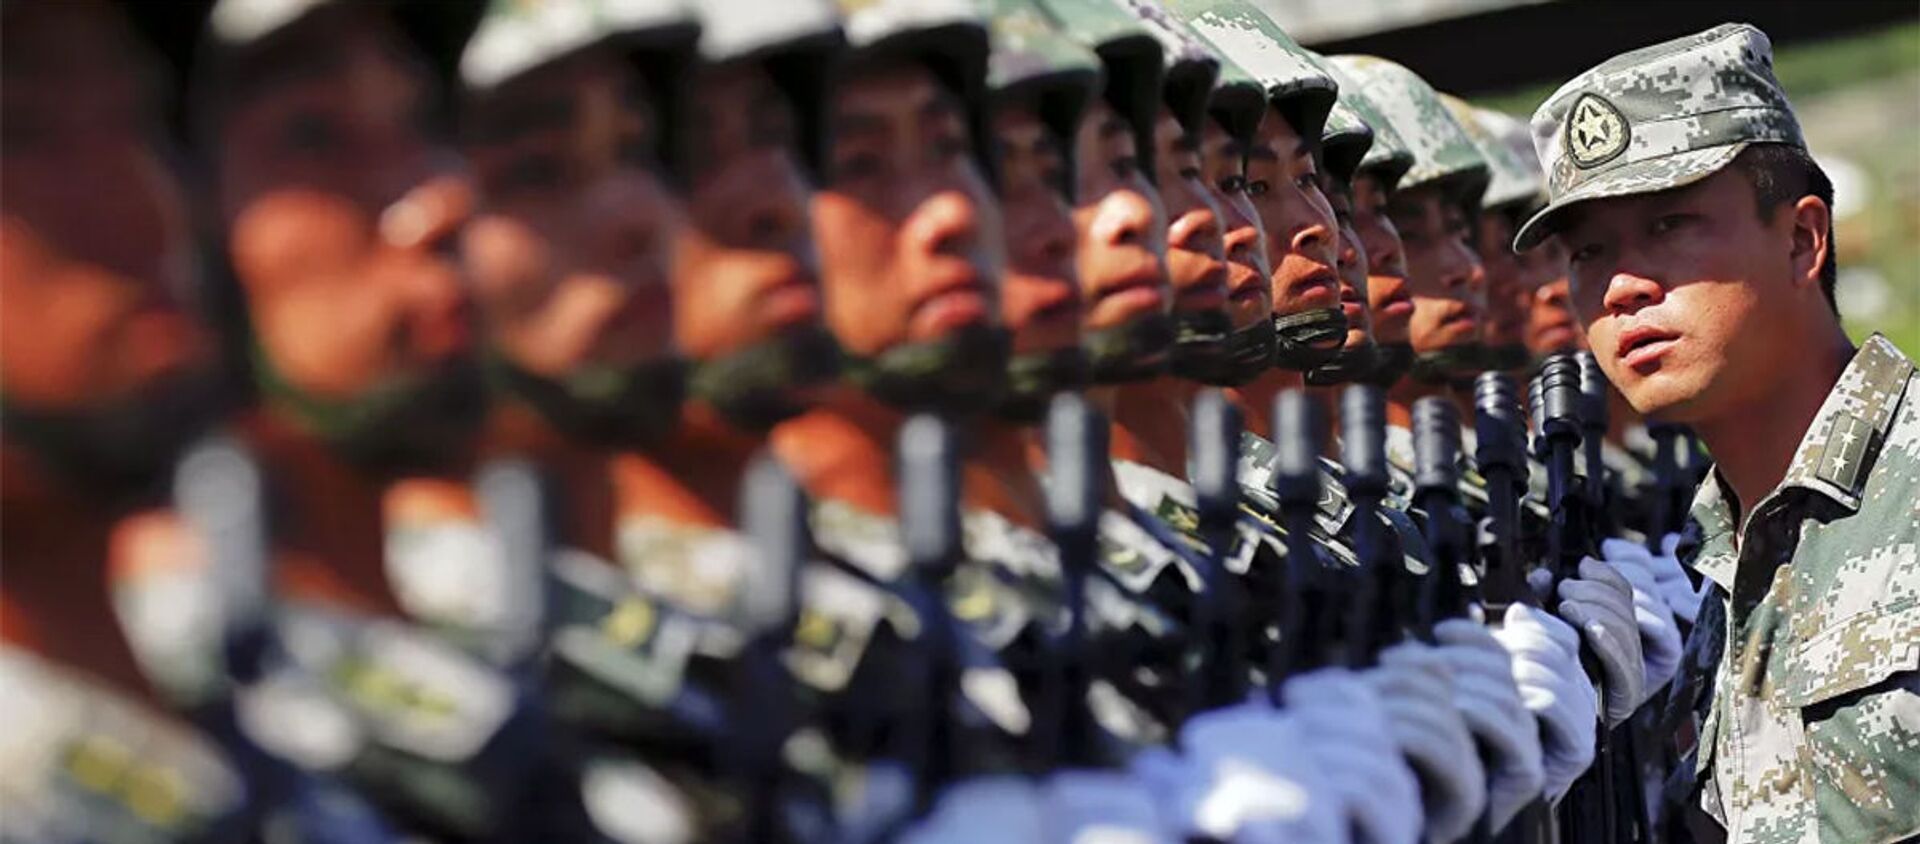 An officer gives instructions as soldiers of China's People's Liberation Army form a line during a training session for a military parade to mark the 70th anniversary of the end of World War Two, at a military base in Beijing, China, August 22, 2015 - 俄罗斯卫星通讯社, 1920, 07.06.2021